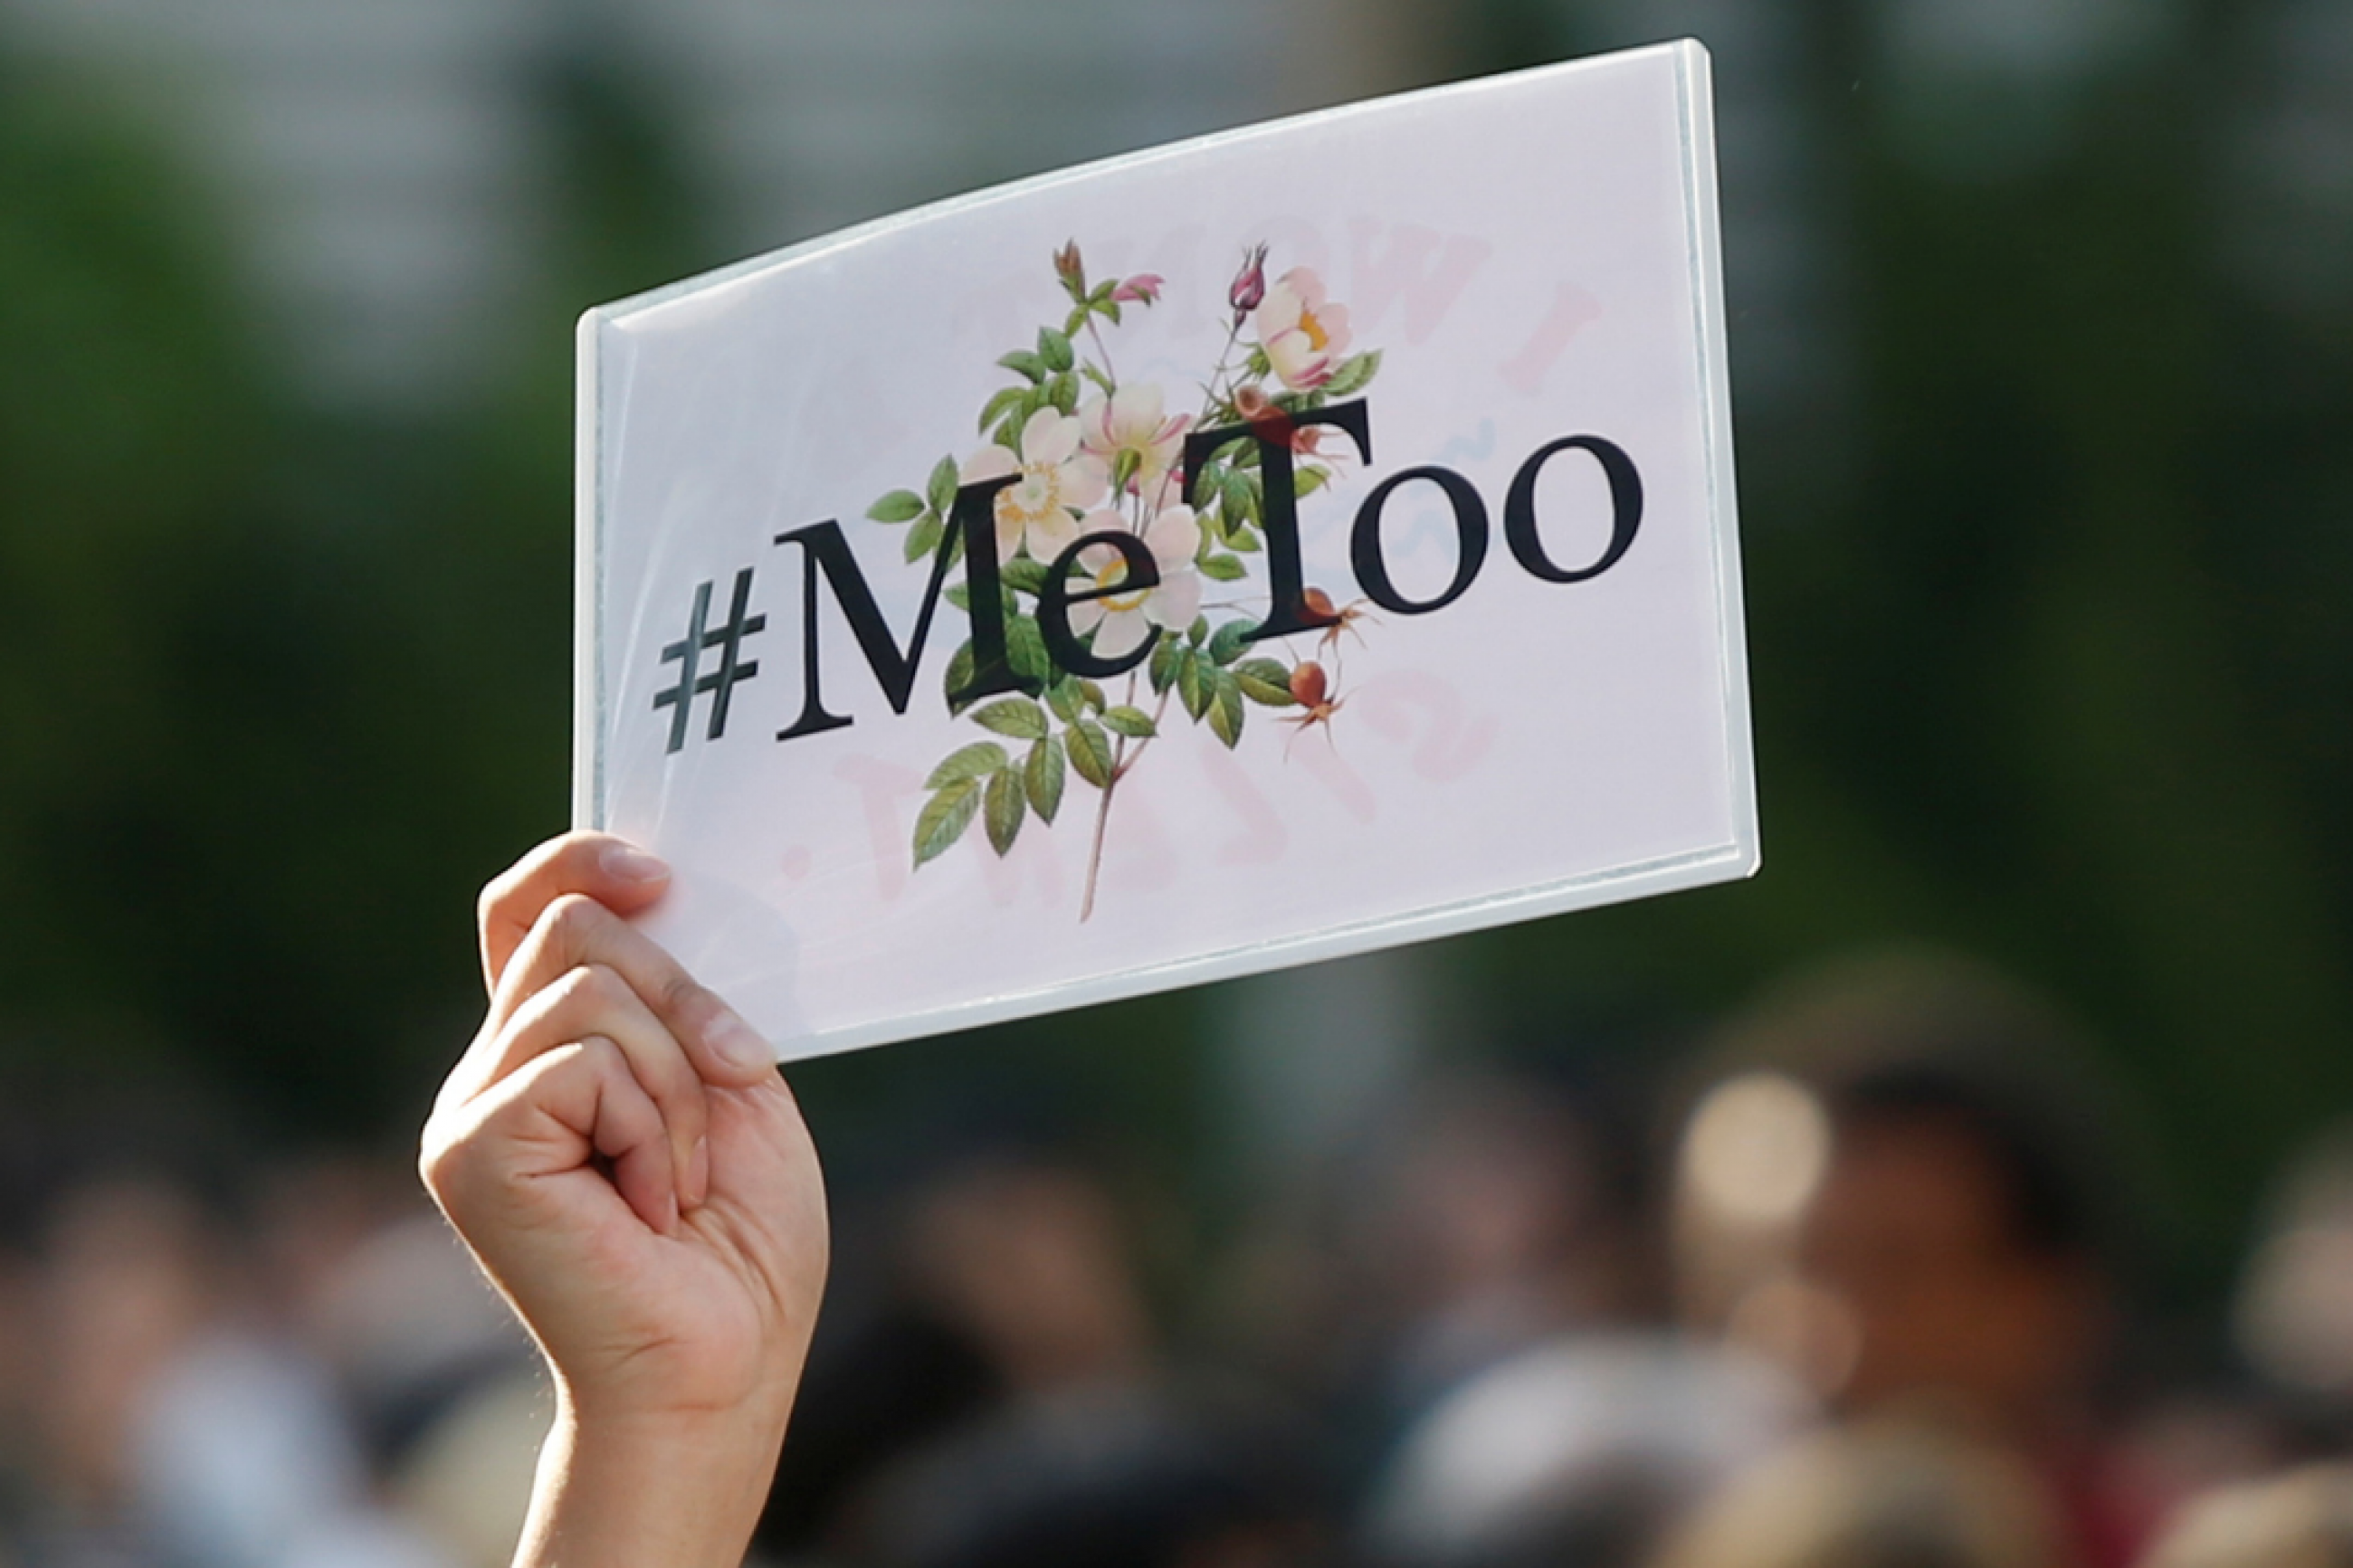 A protester raises a #MeToo sign during a rally against harassment at Shinjuku shopping and amusement district in Tokyo, Japan on April 28, 2018. REUTERS/Issei Kato